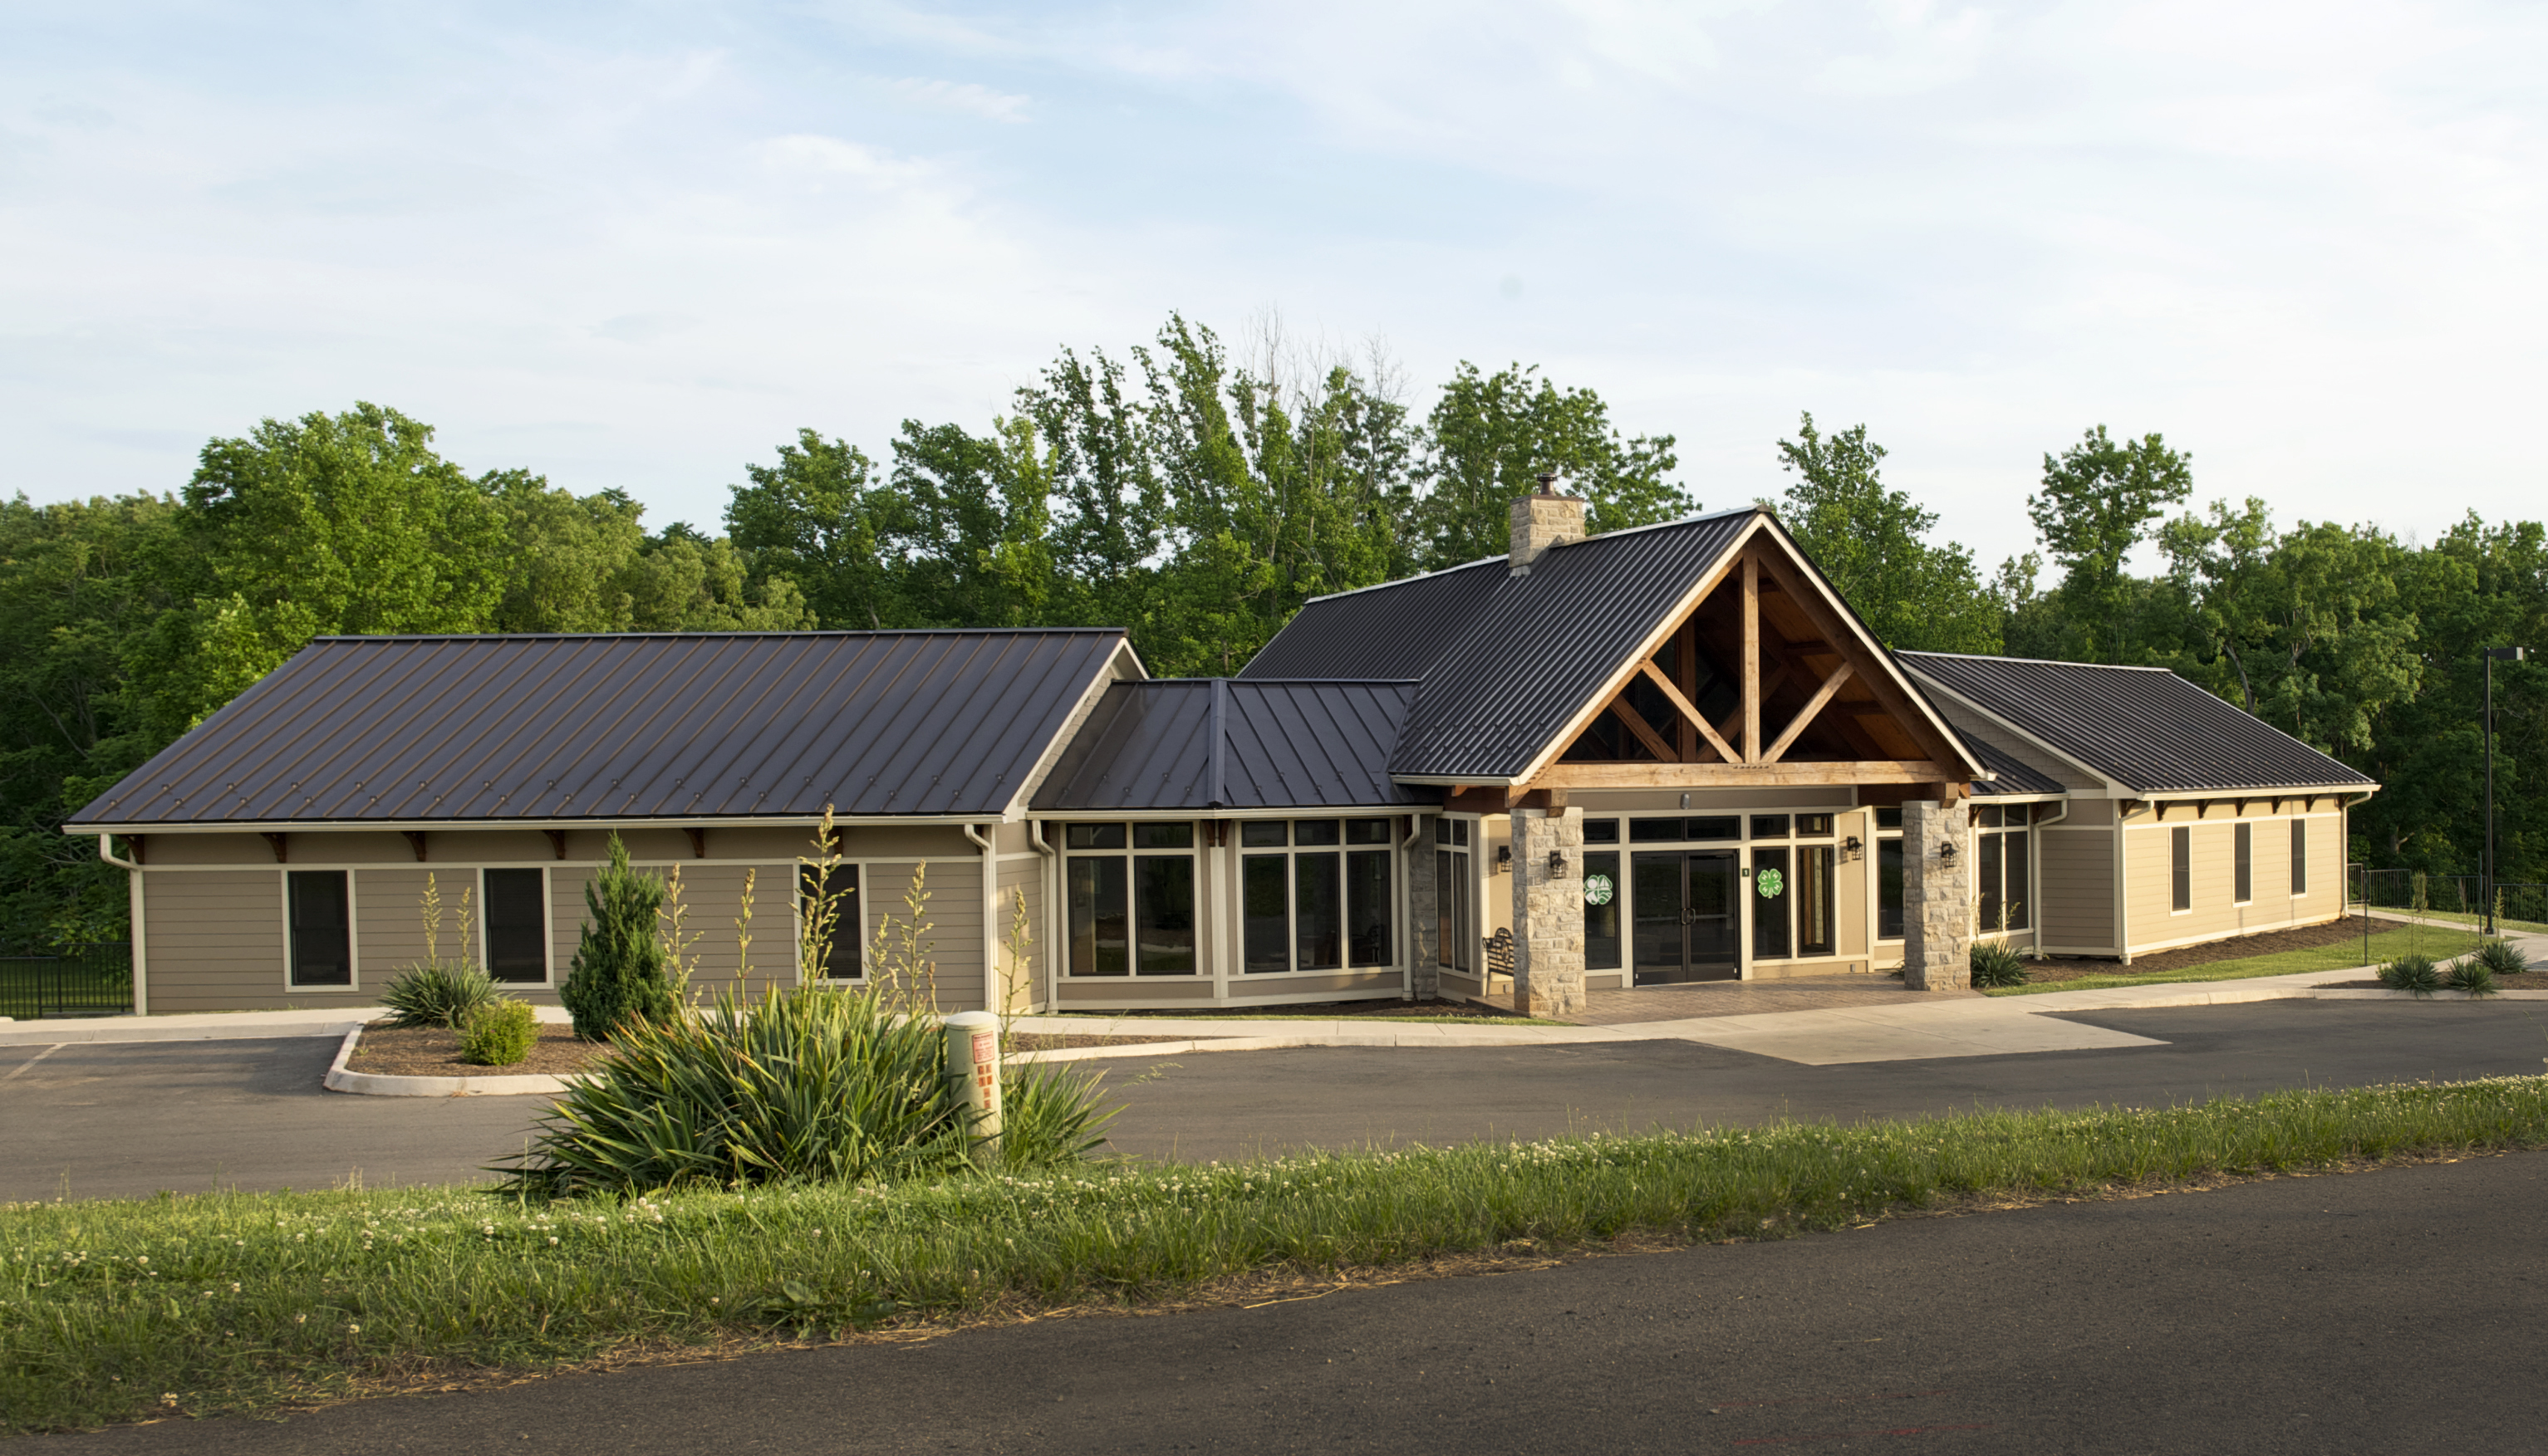 Photograph of the Hahn Welcome Center at the W.E. Skelton 4-H Educational Conference Center at Smith Mountain Lake